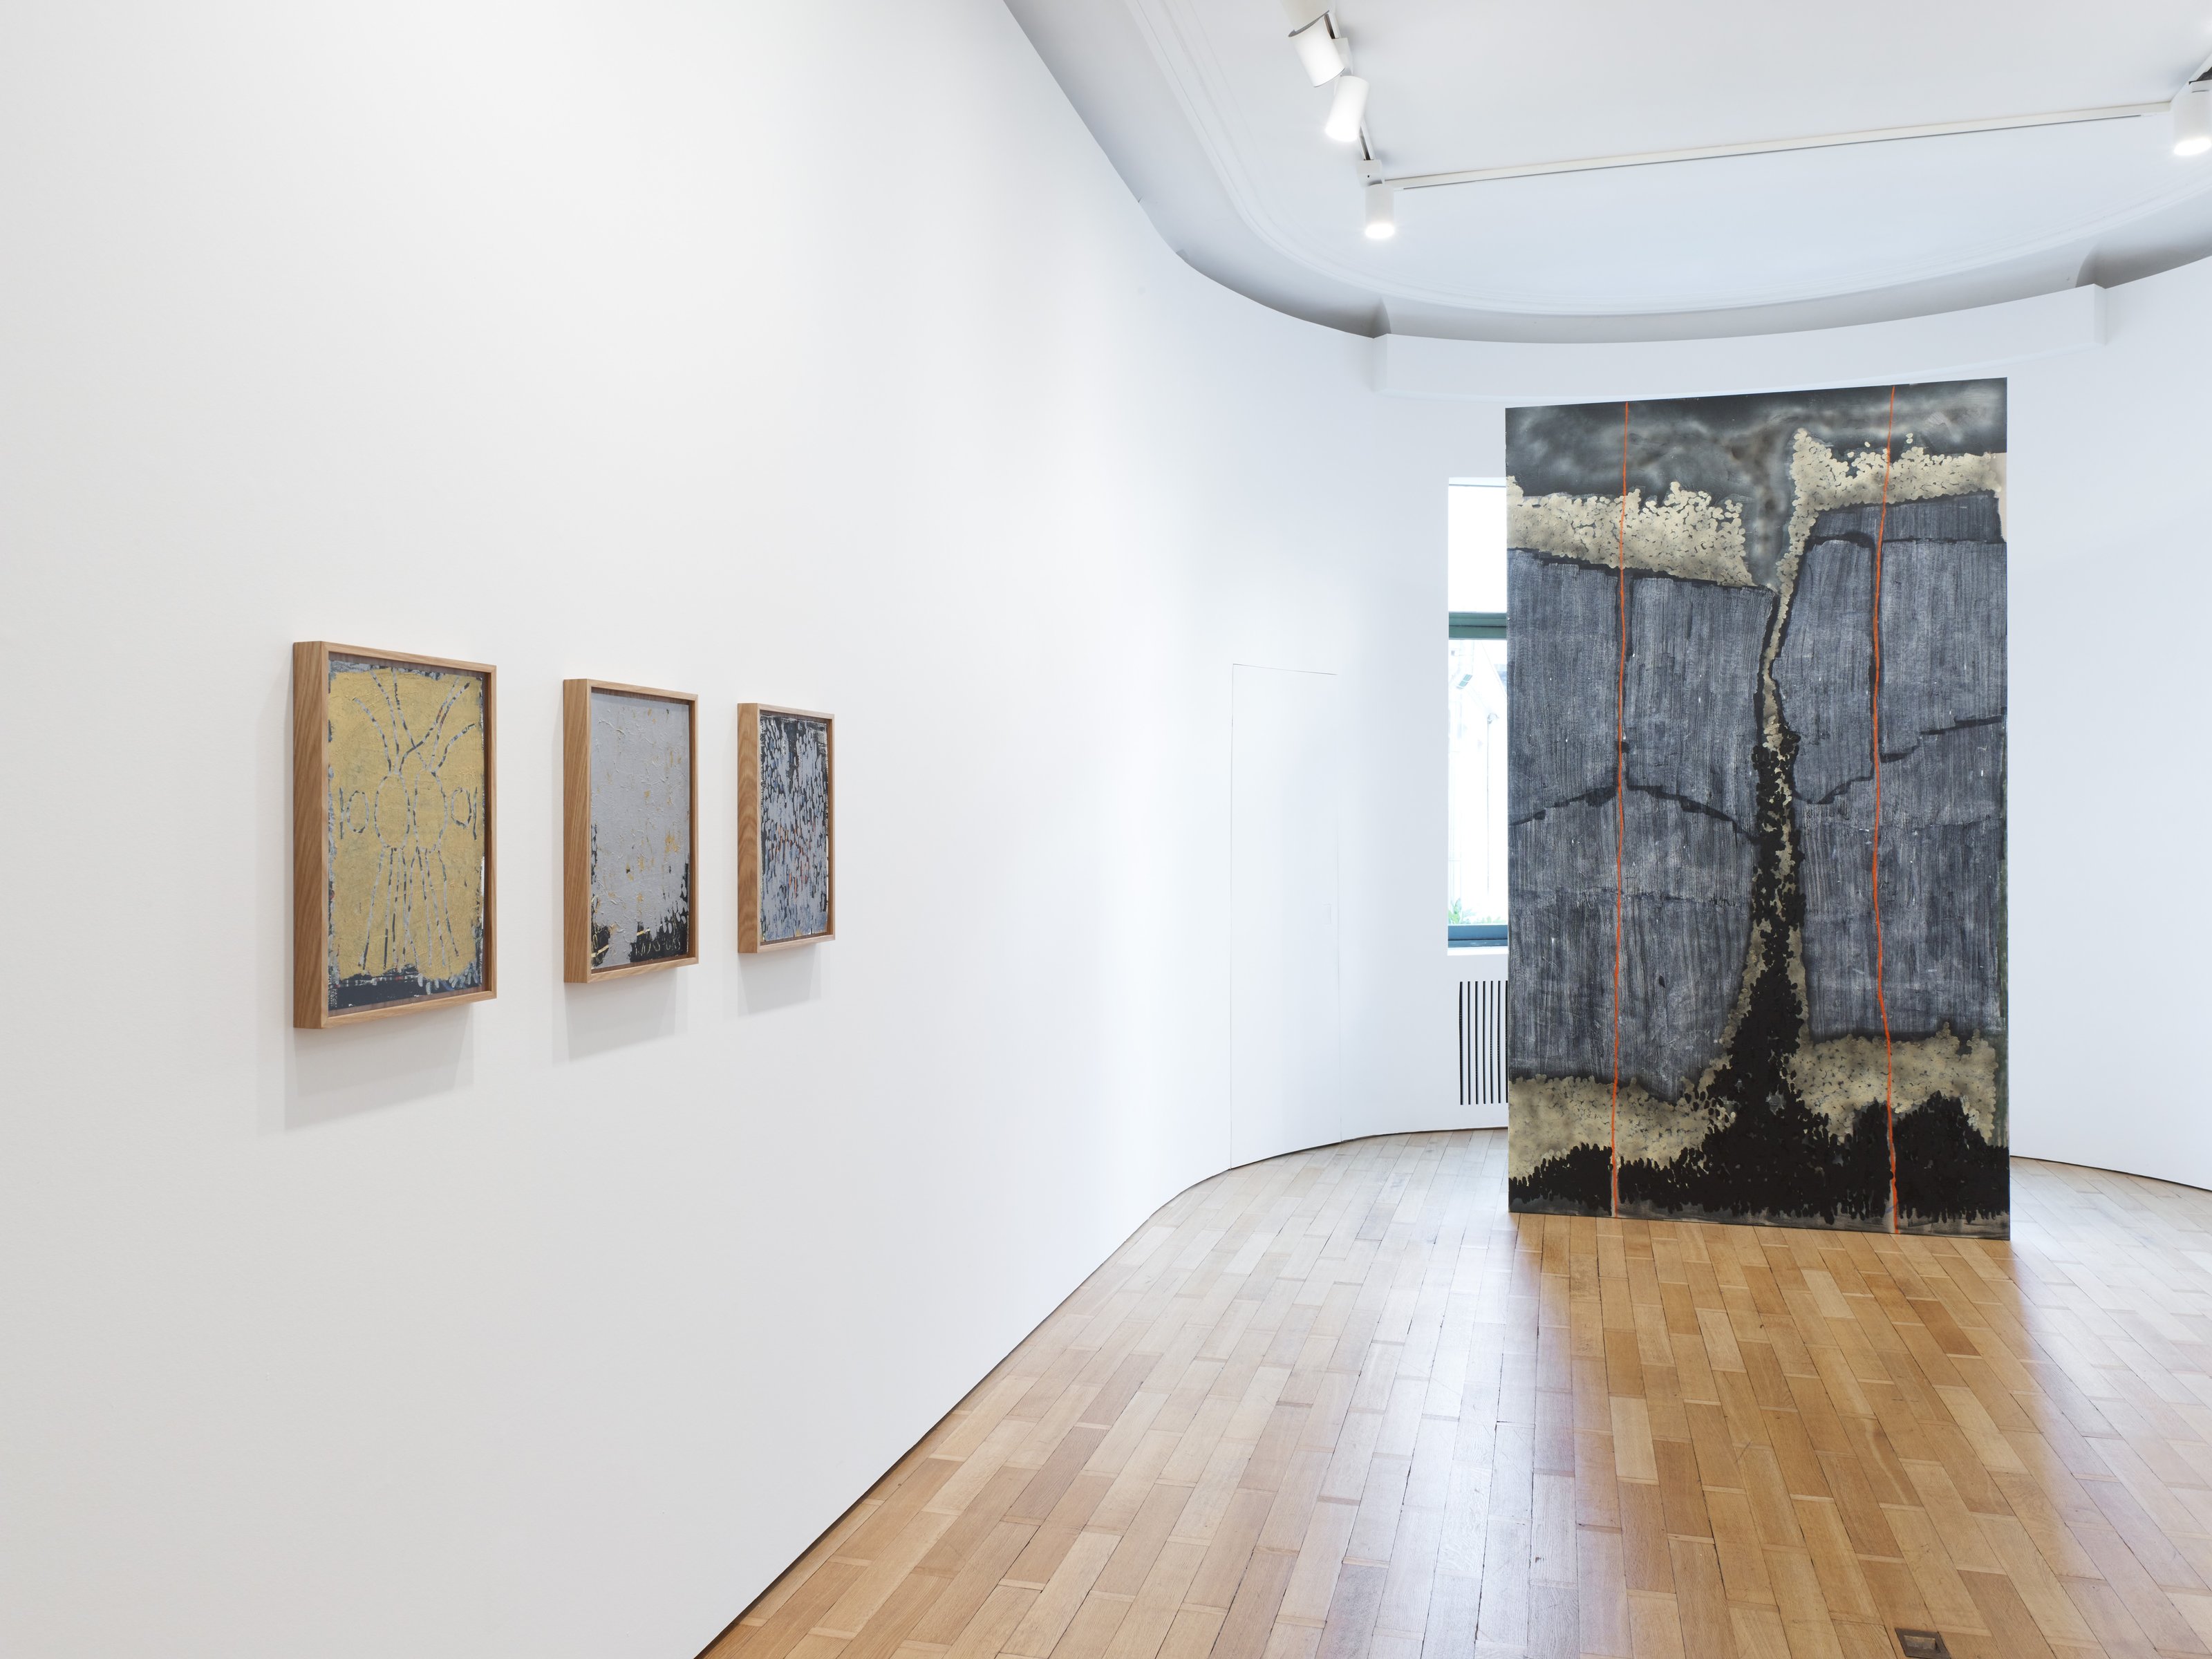 Three earth-toned patterned paintings in wooden frames hang on a white-walled, brightly lit art gallery wall, alongside a rectangular fabric with abstract earth-toned patterns hanging from the ceiling.